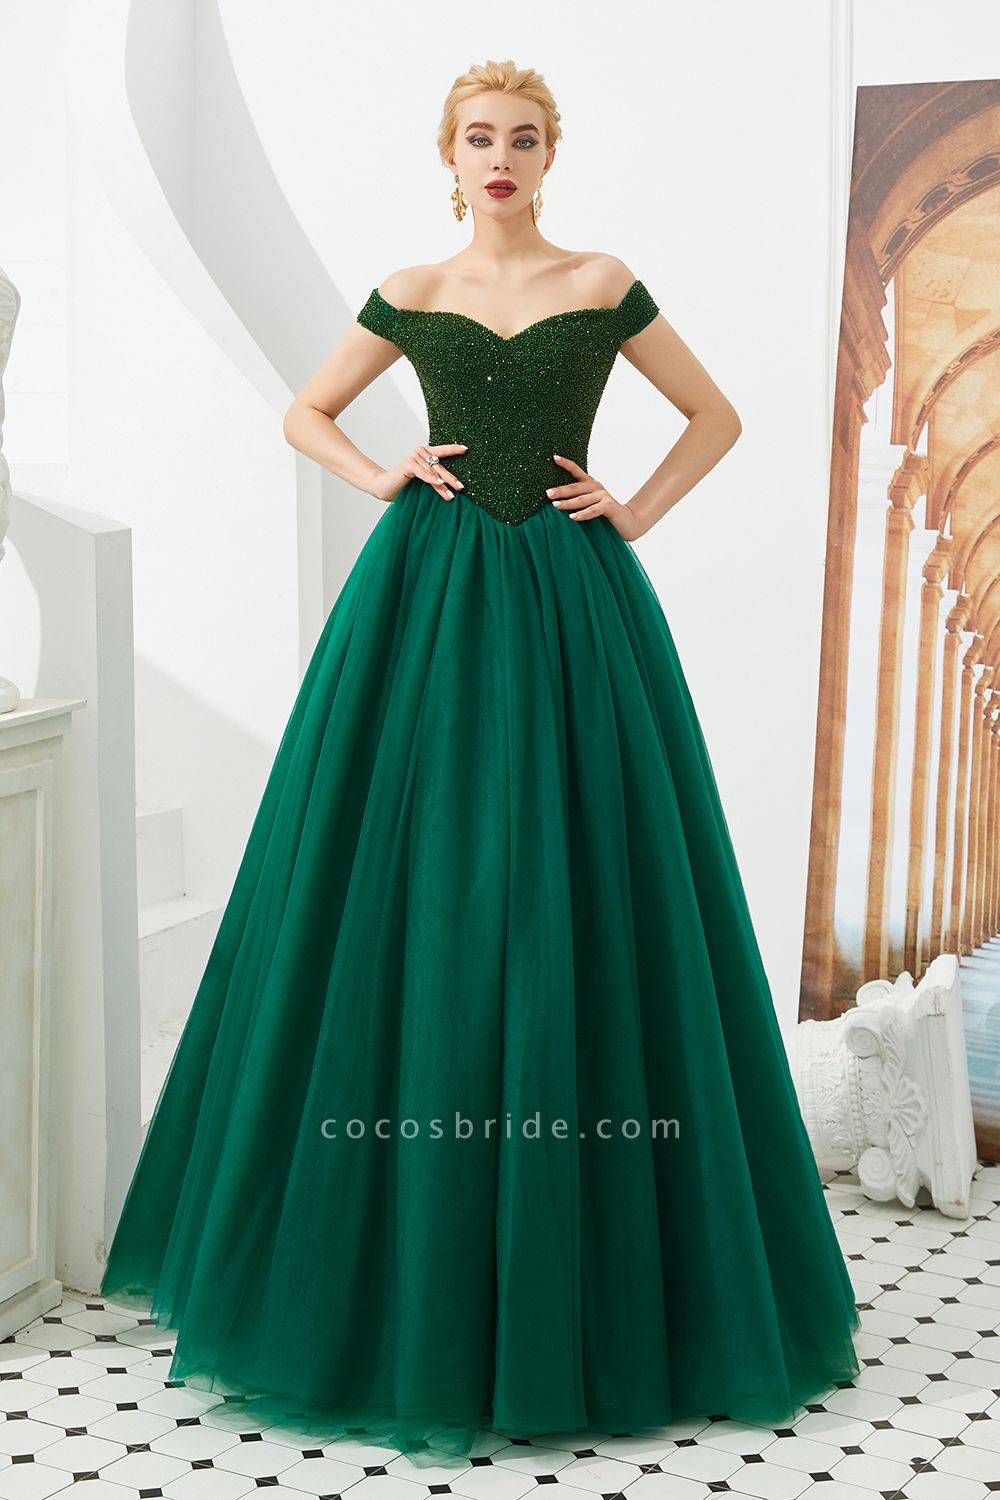 Glorious Off-the-shoulder Tulle A-line Prom Dress